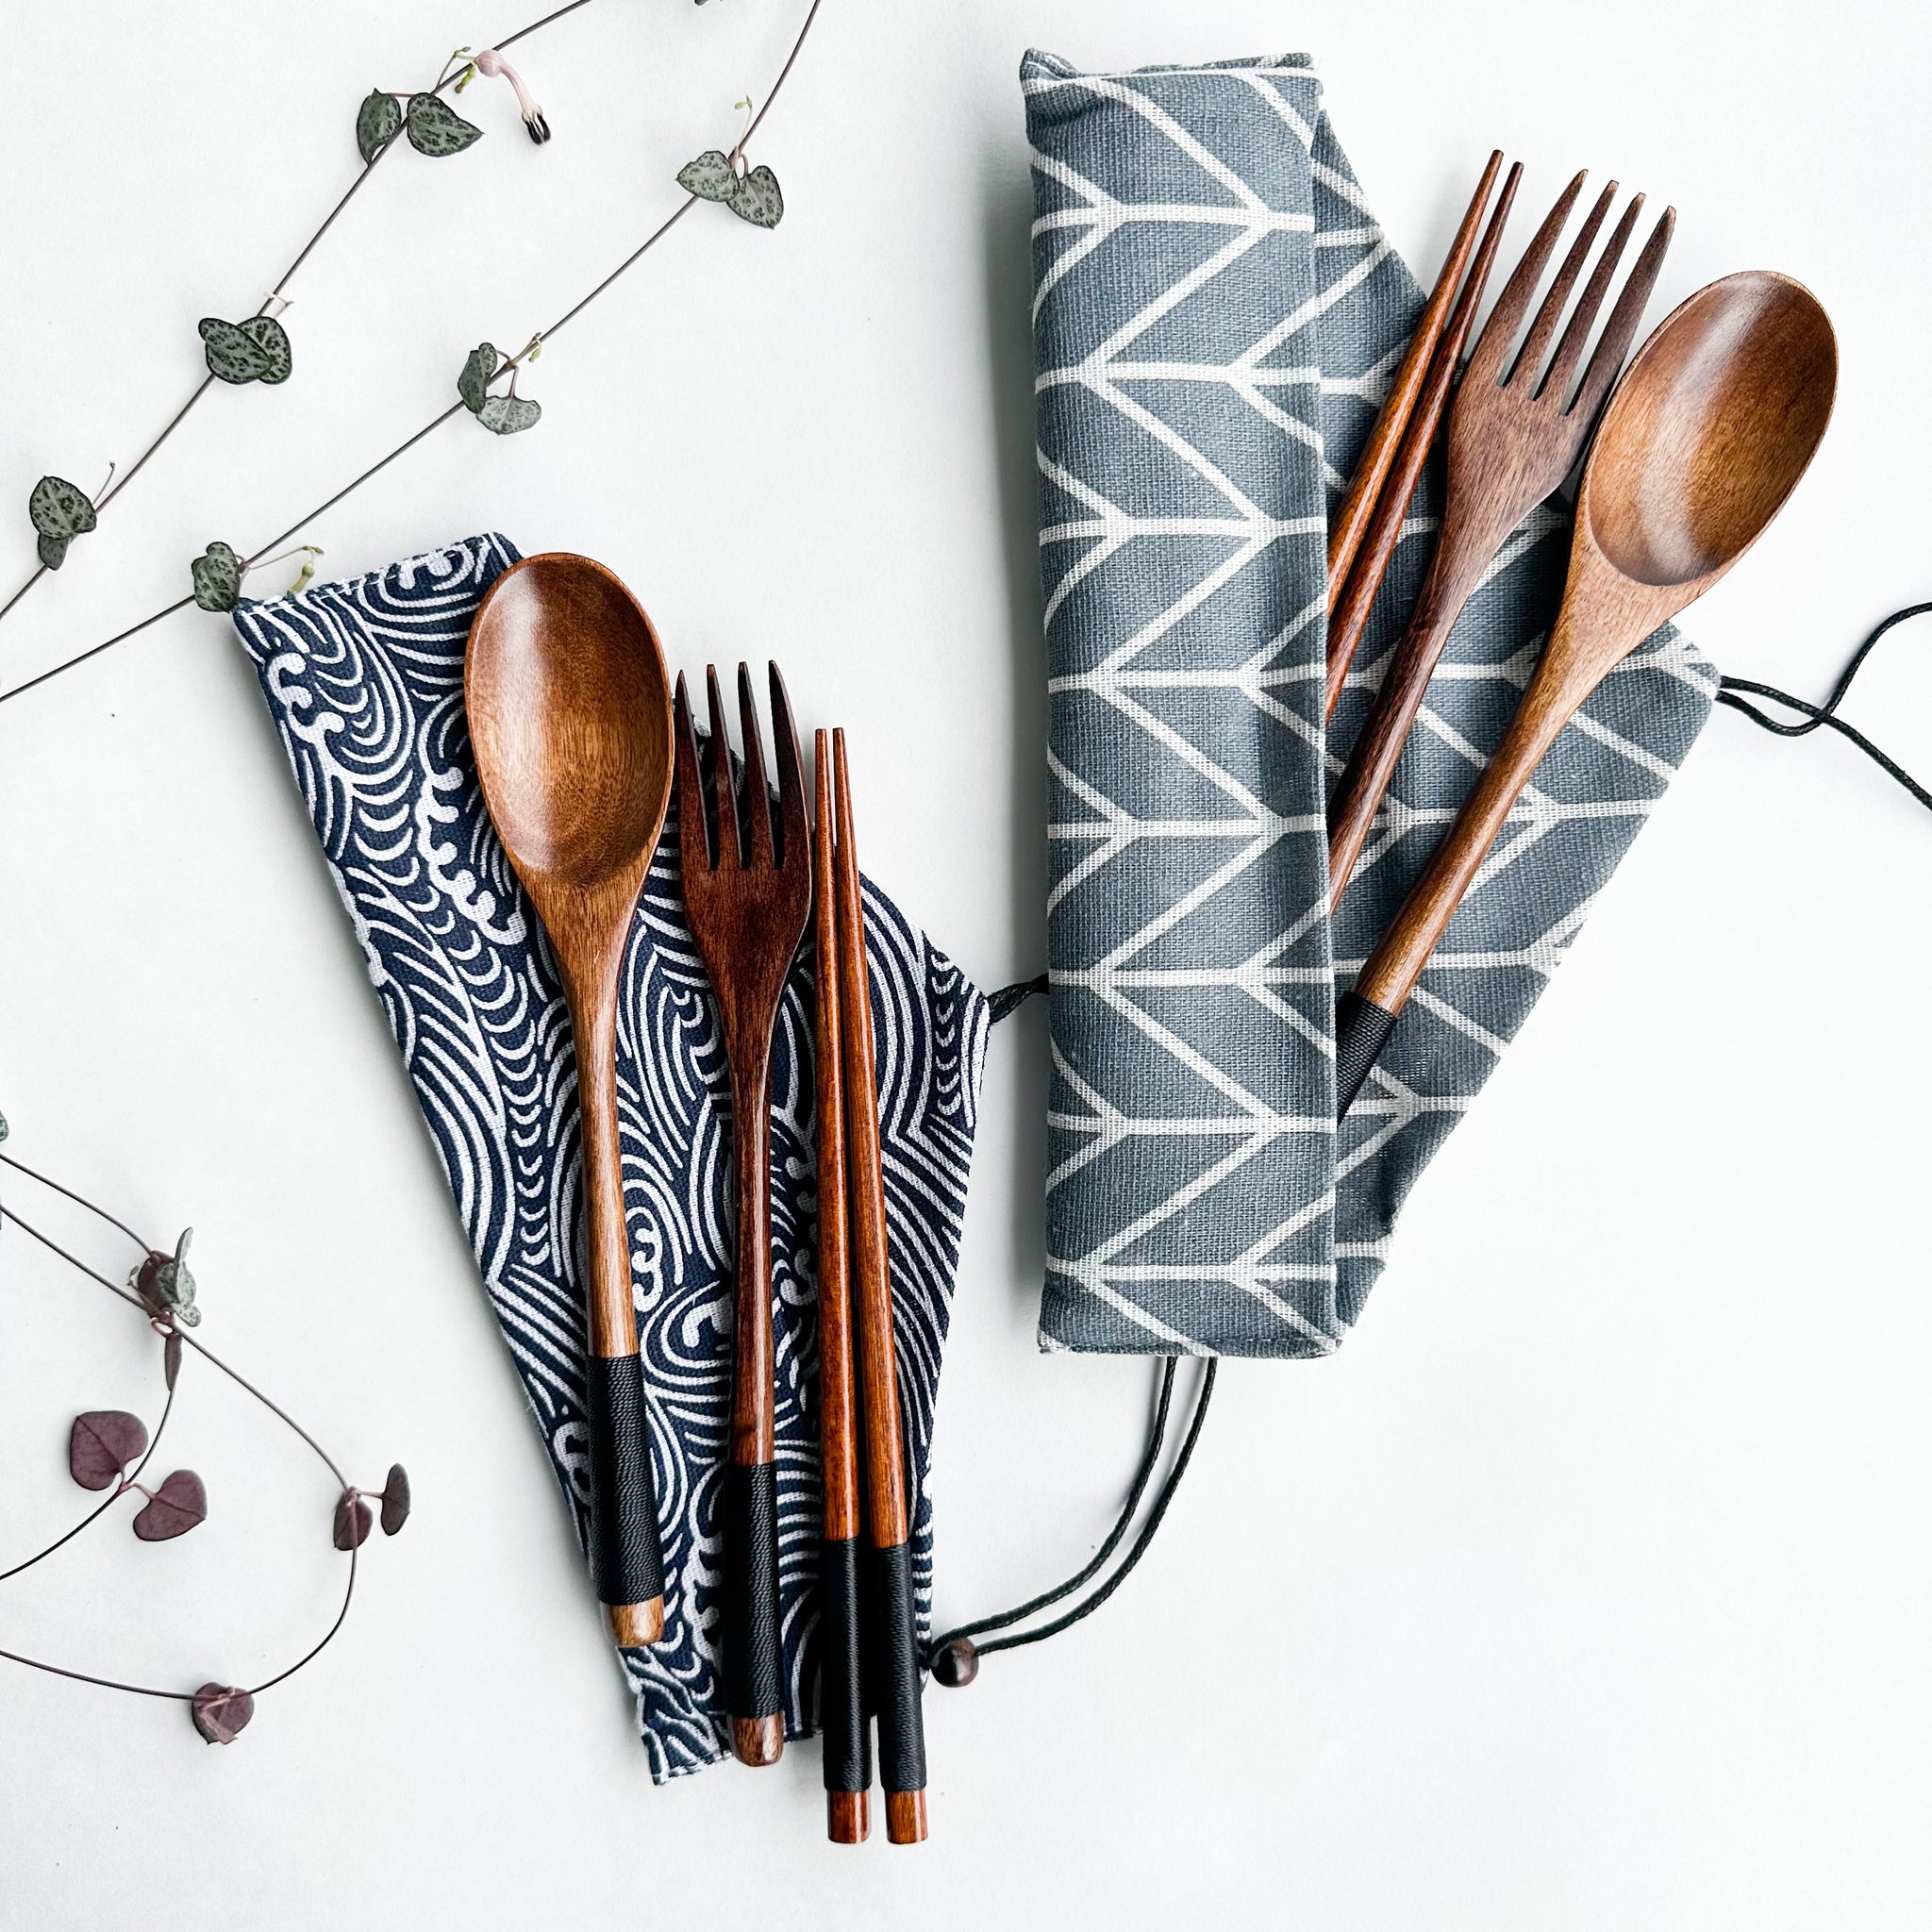 Bamboo Zero Waste Reusable Travel Cutlery Set With Pouch - Fork